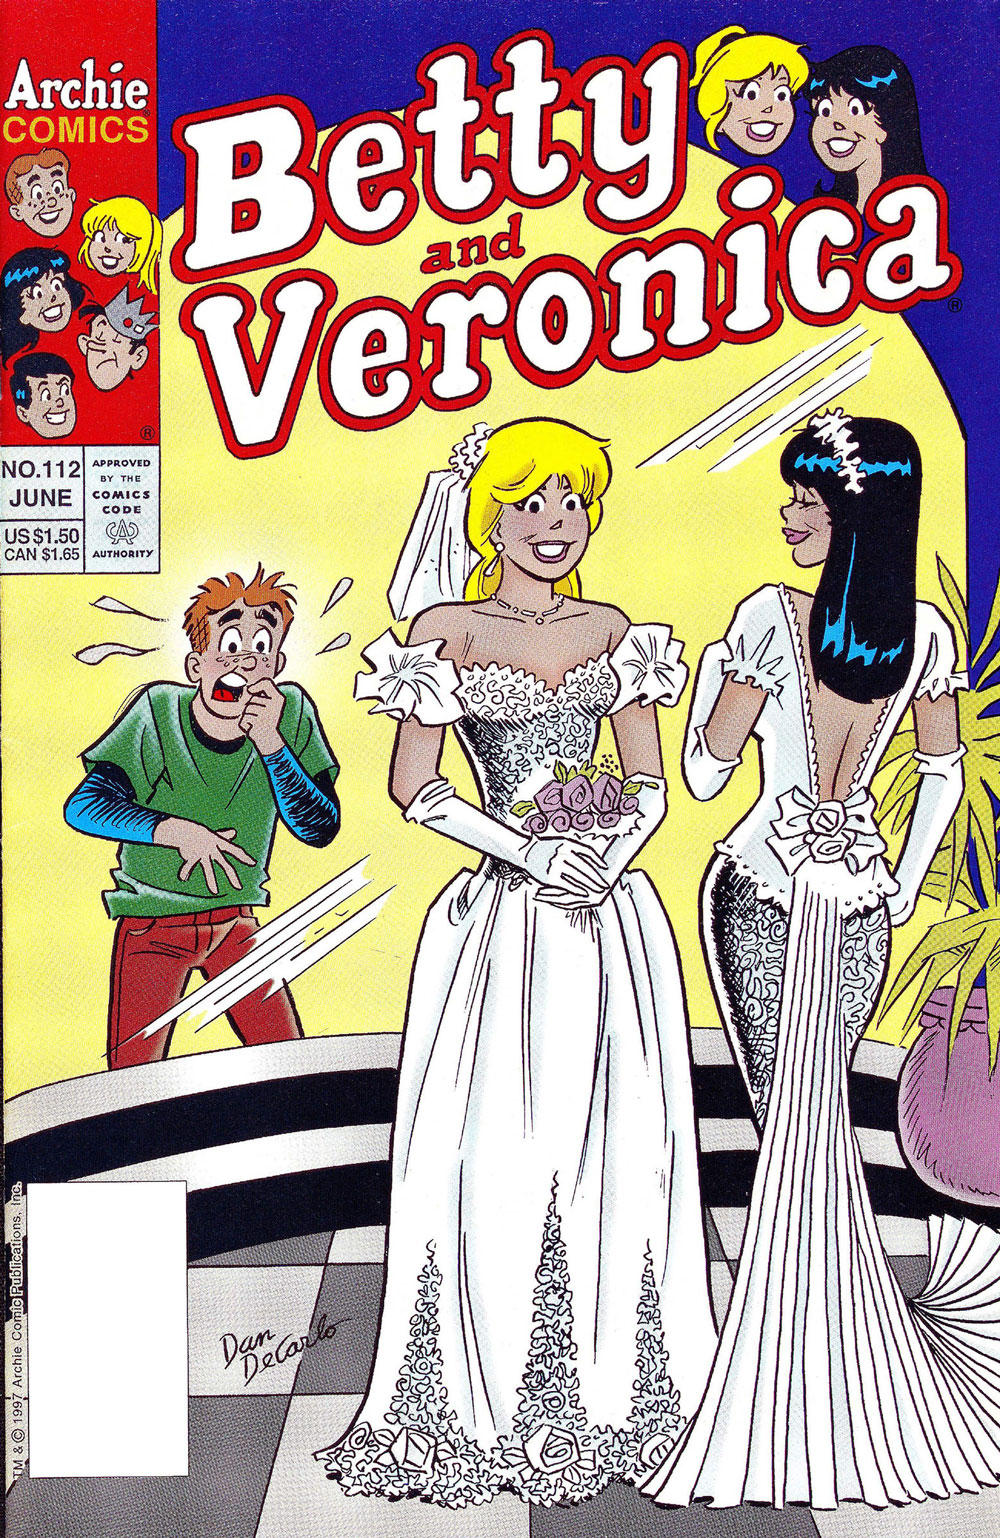 Cover of BETTY AND VERONICA #112. Betty and Veronica try on wedding dresses while Archie looks on in shock.